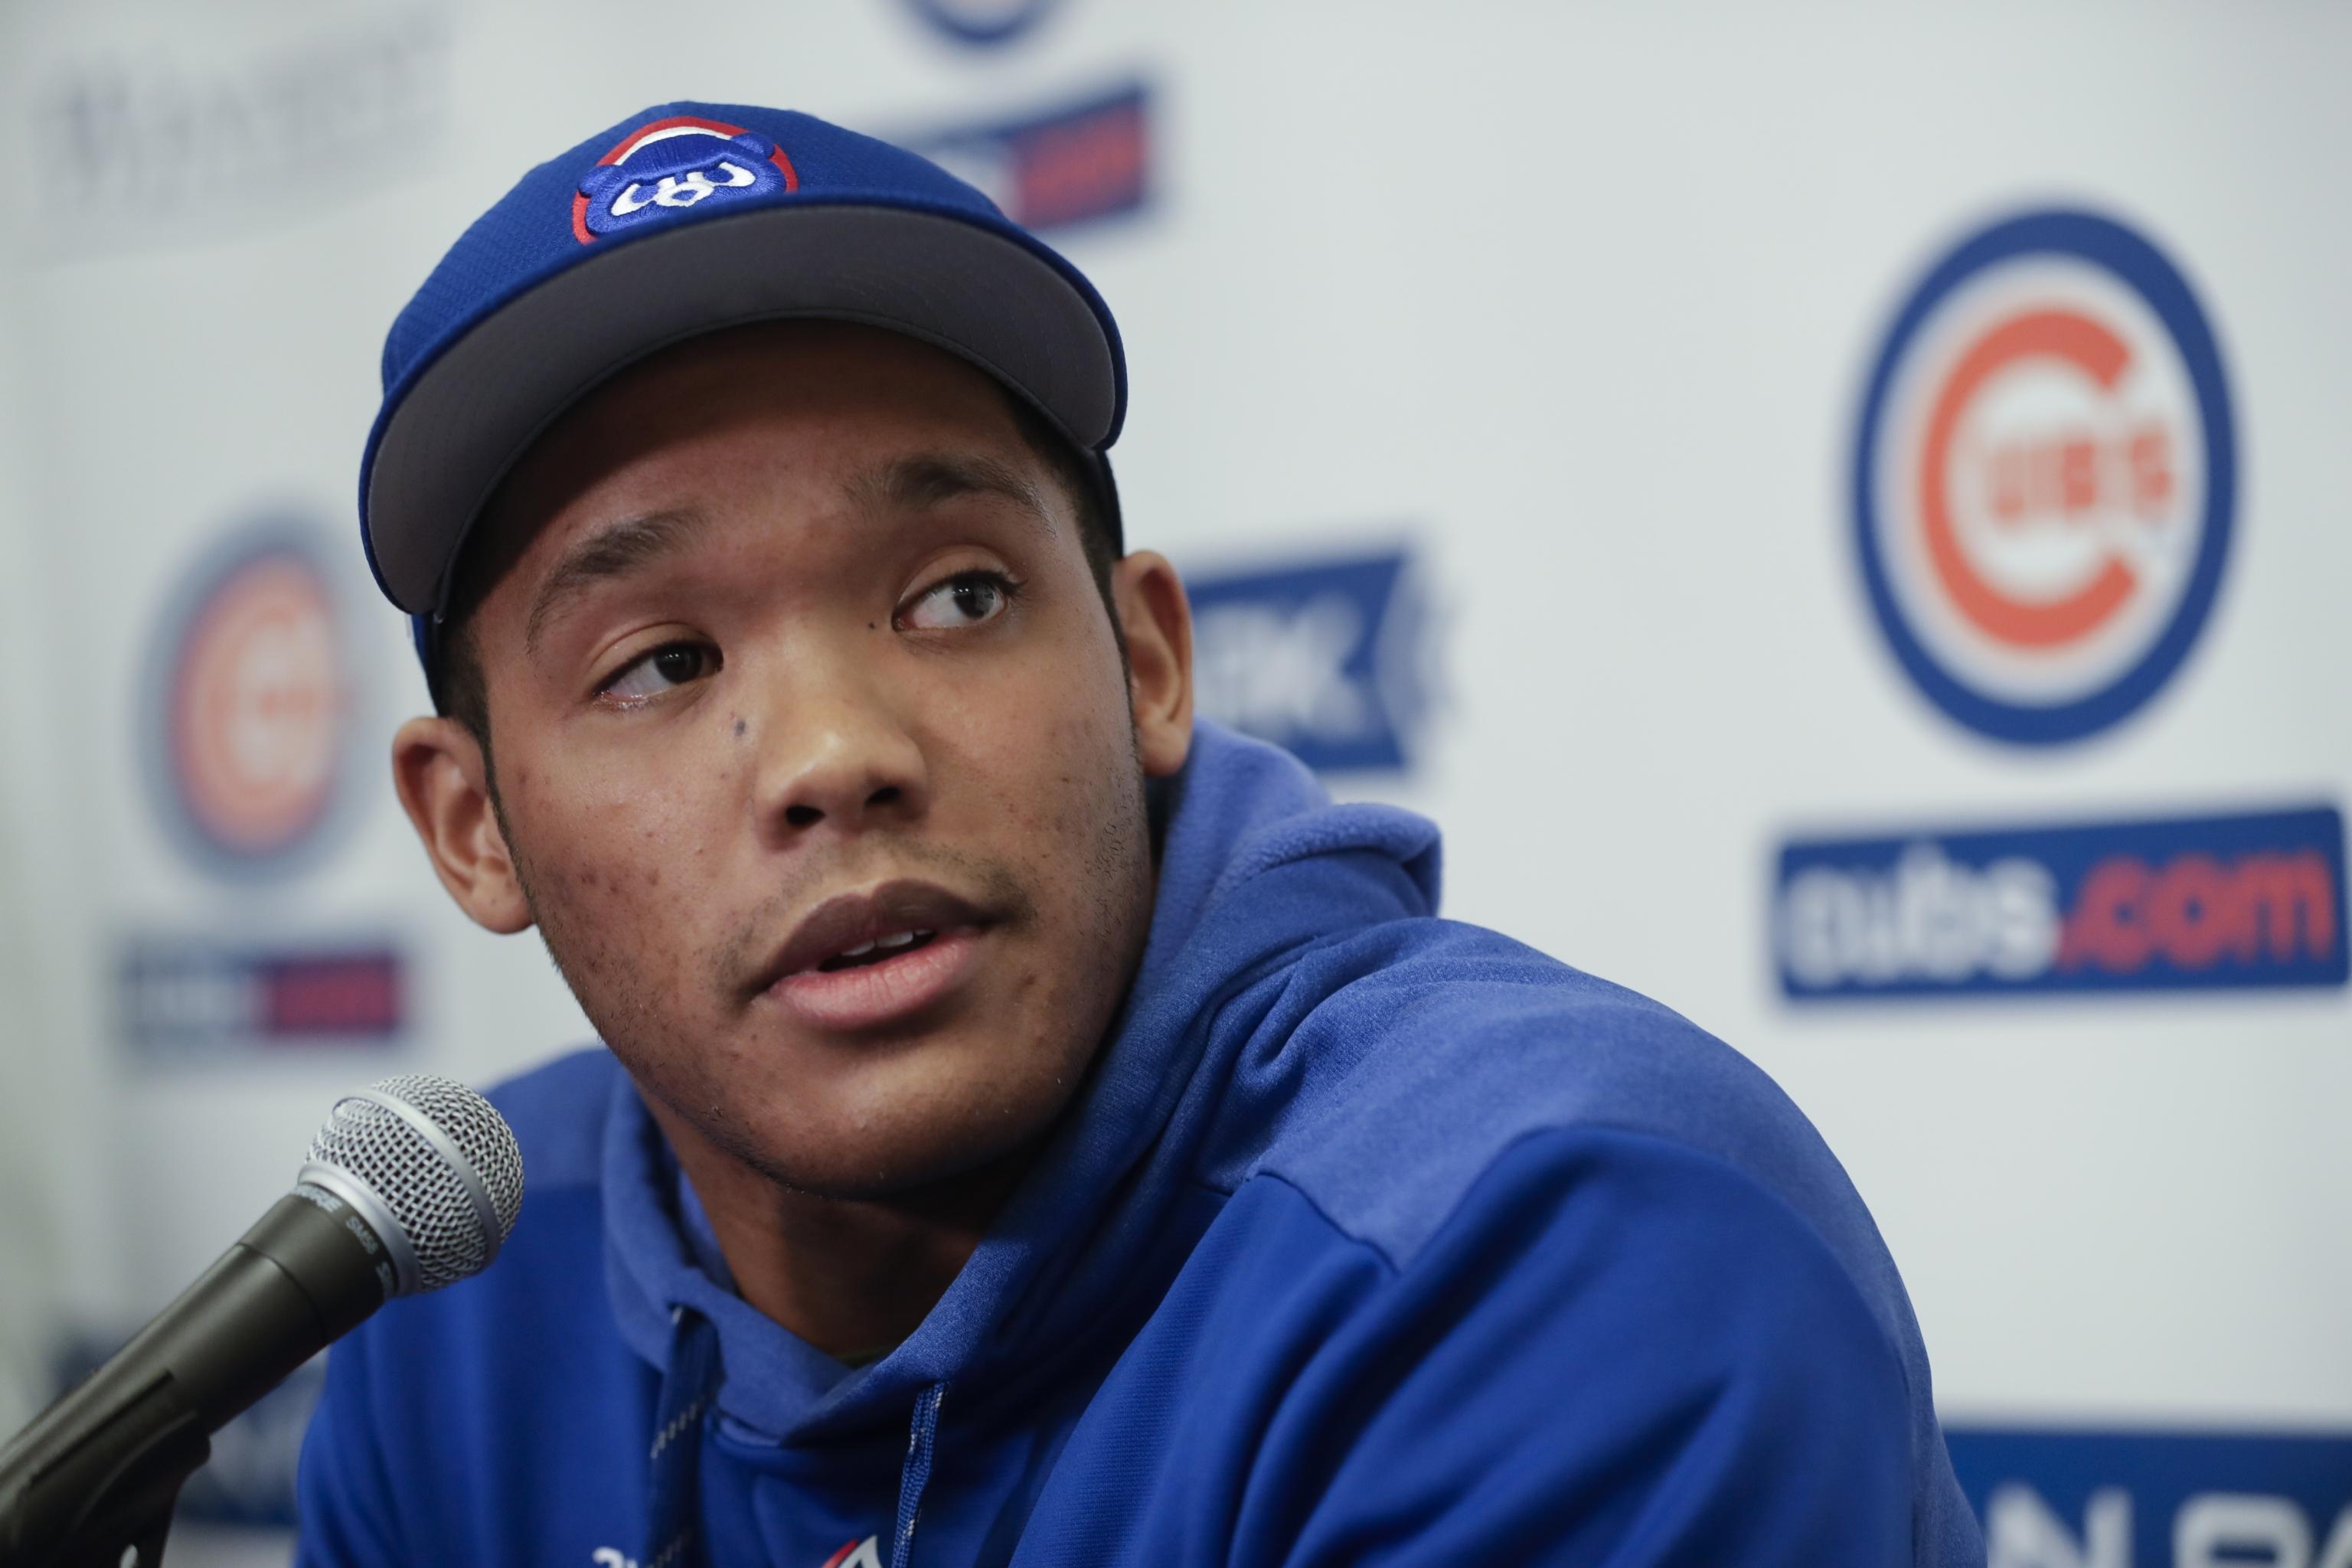 Addison Russell reportedly has smoking hot new girlfriend